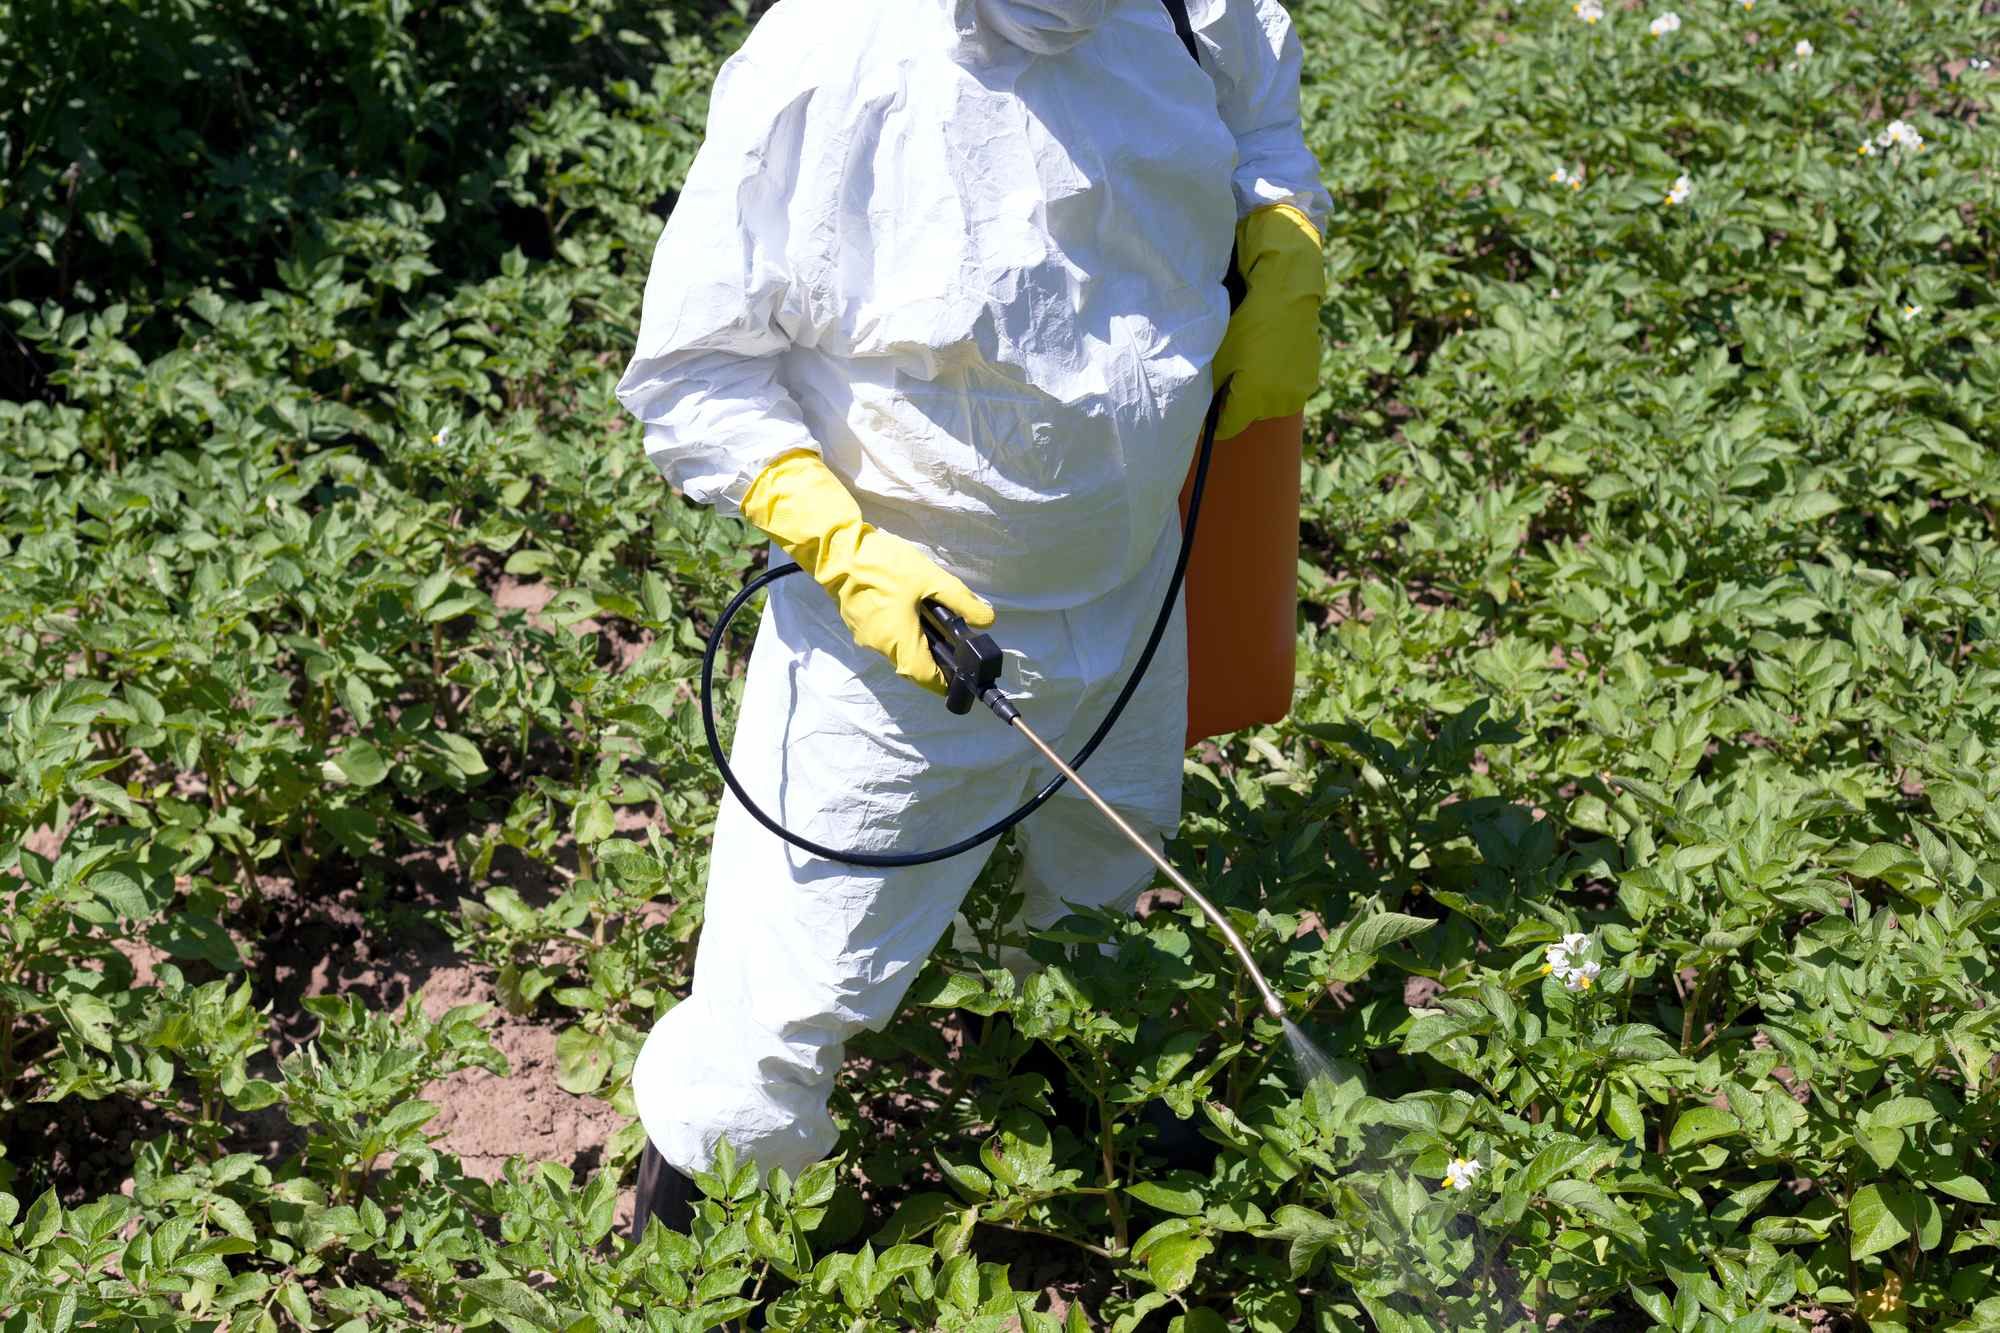 Worker spraying herbicides regarding information on whether glyphosate is safe or not